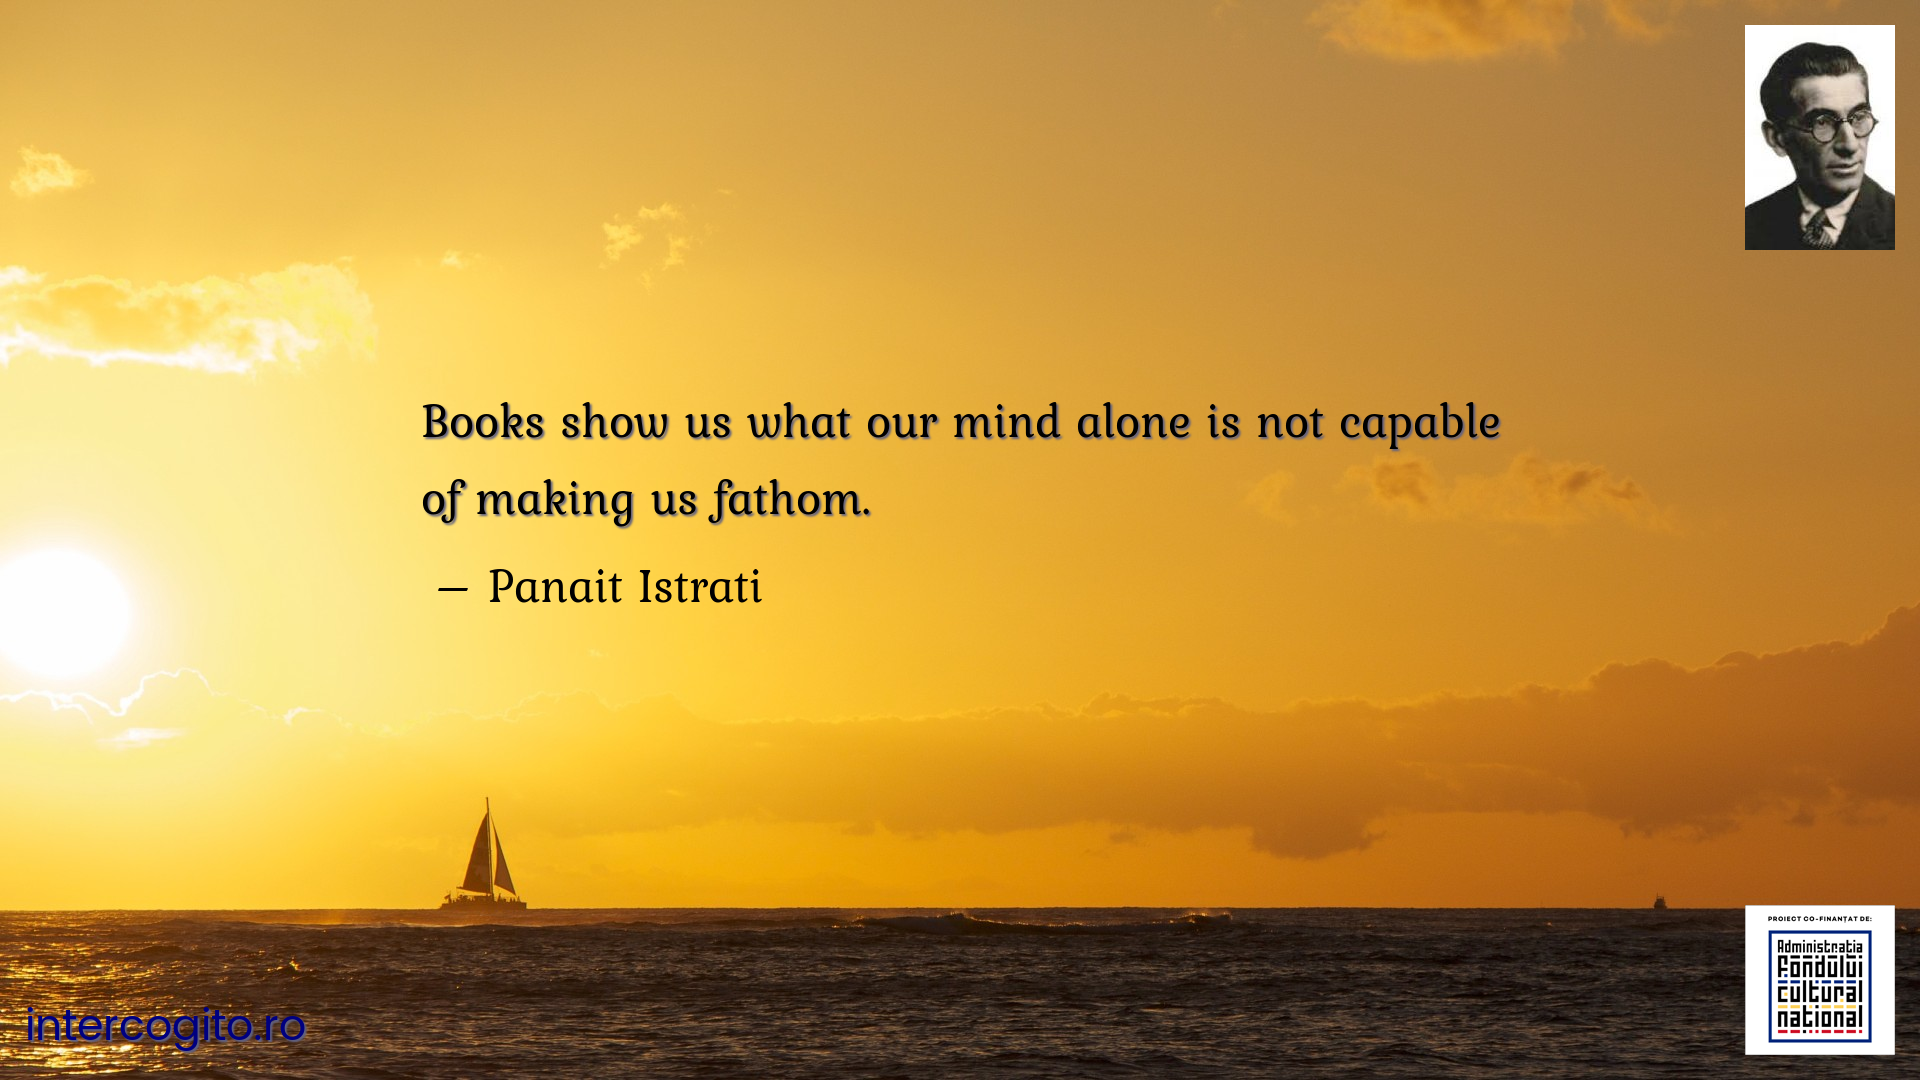 Books show us what our mind alone is not capable of making us fathom.